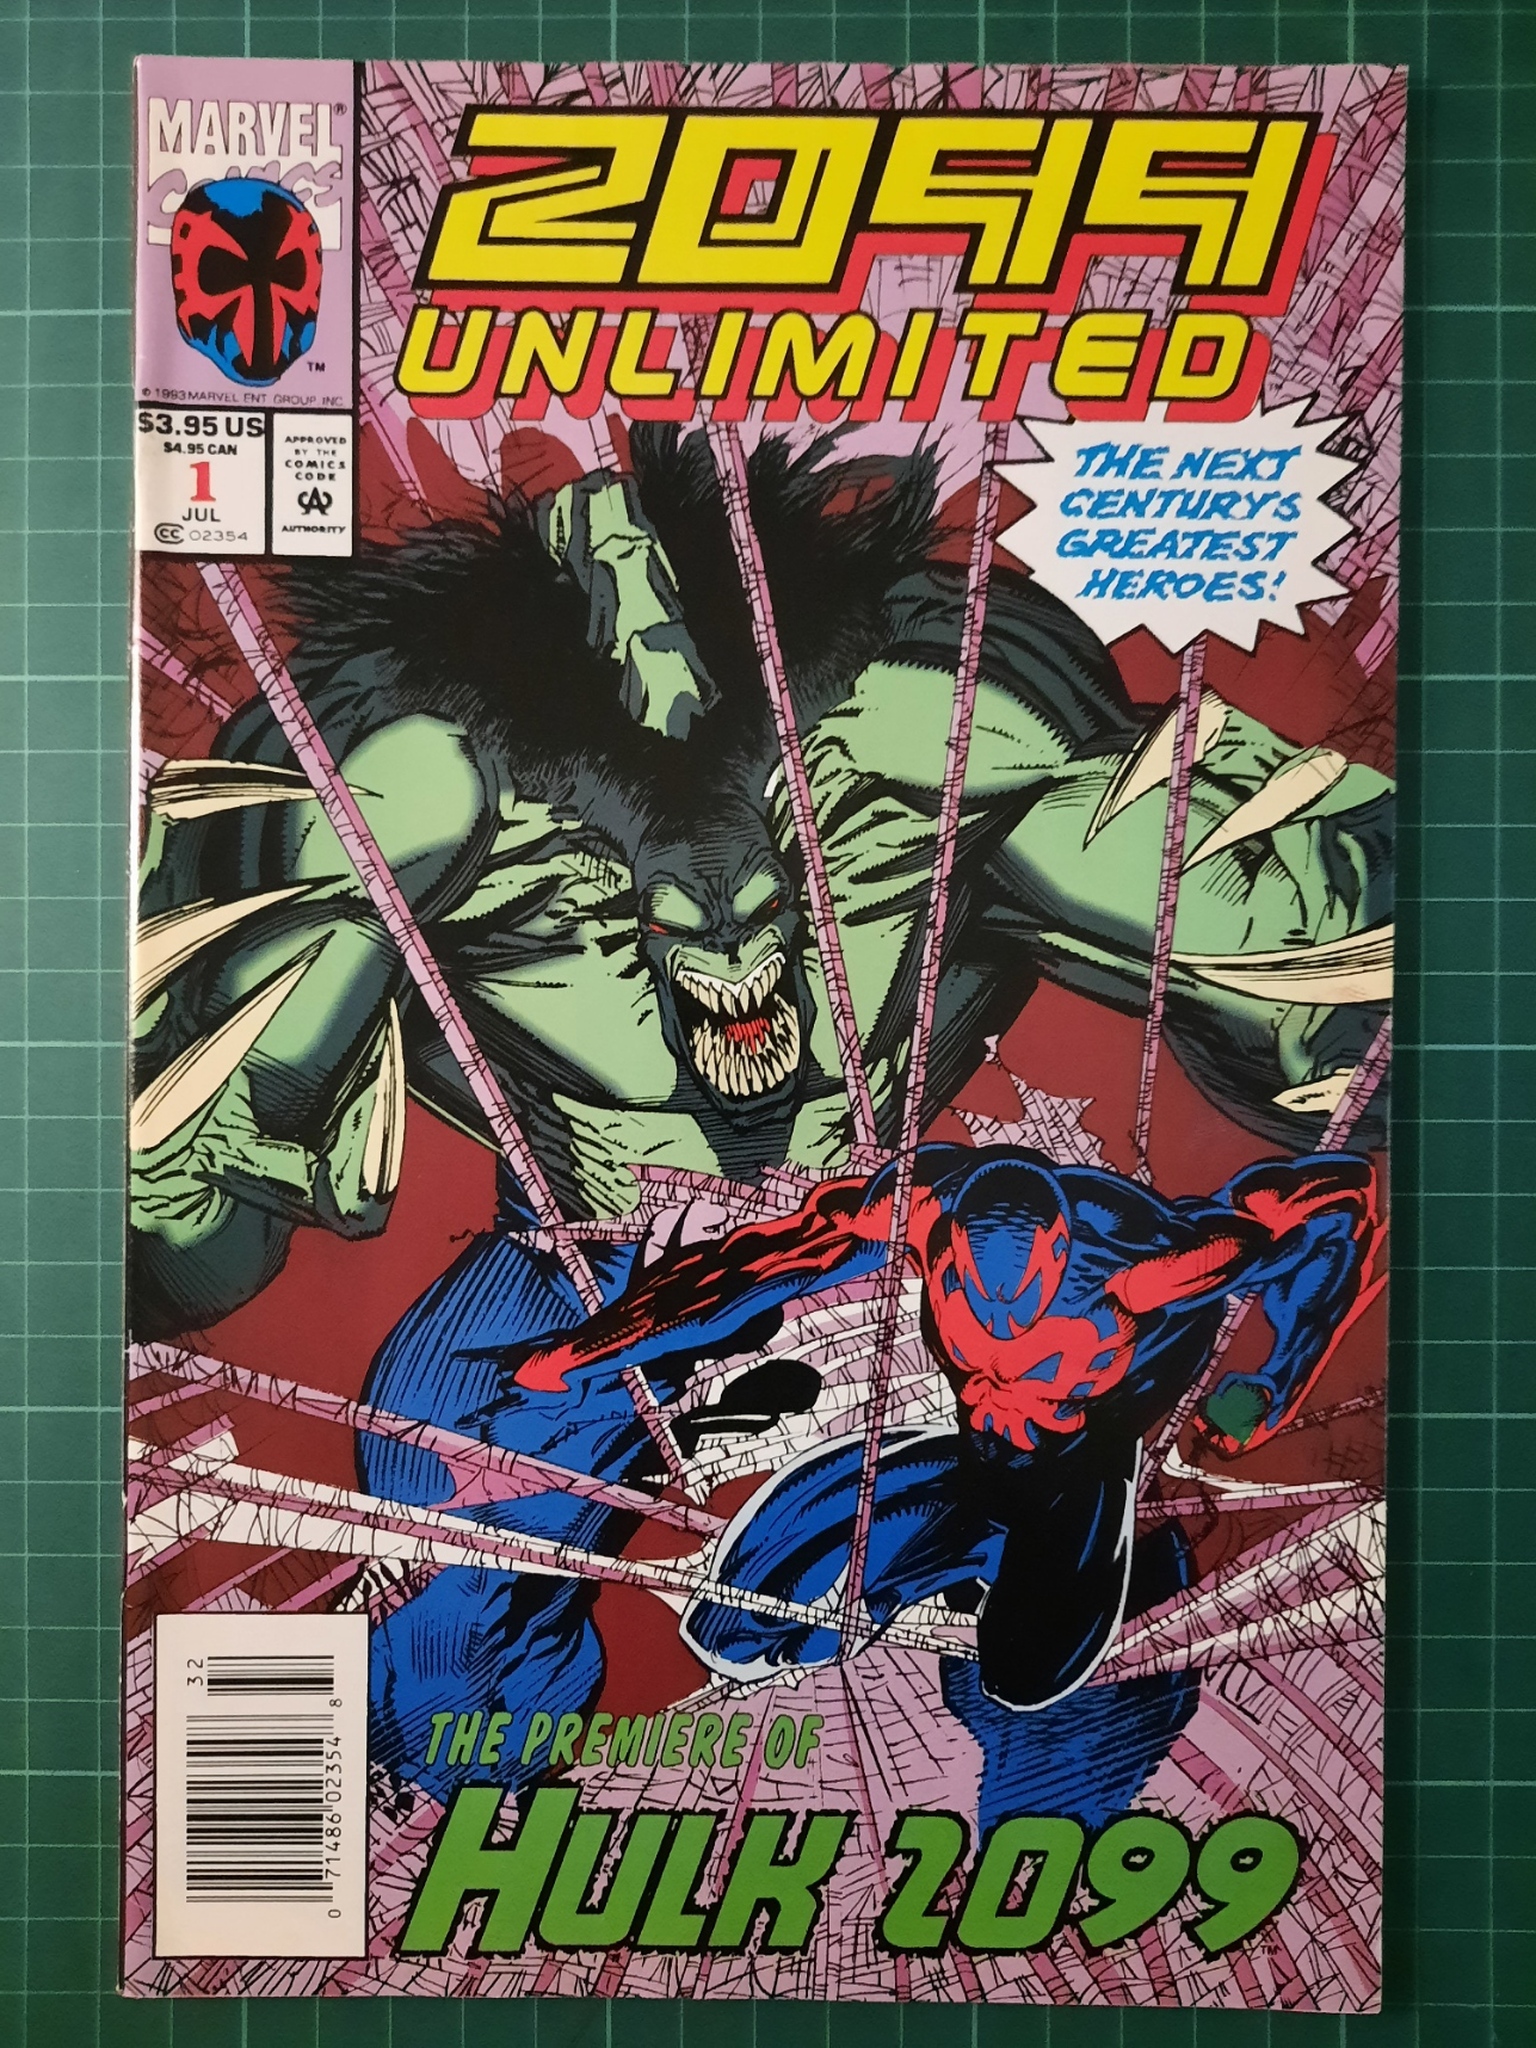 2099 Unlimited #1